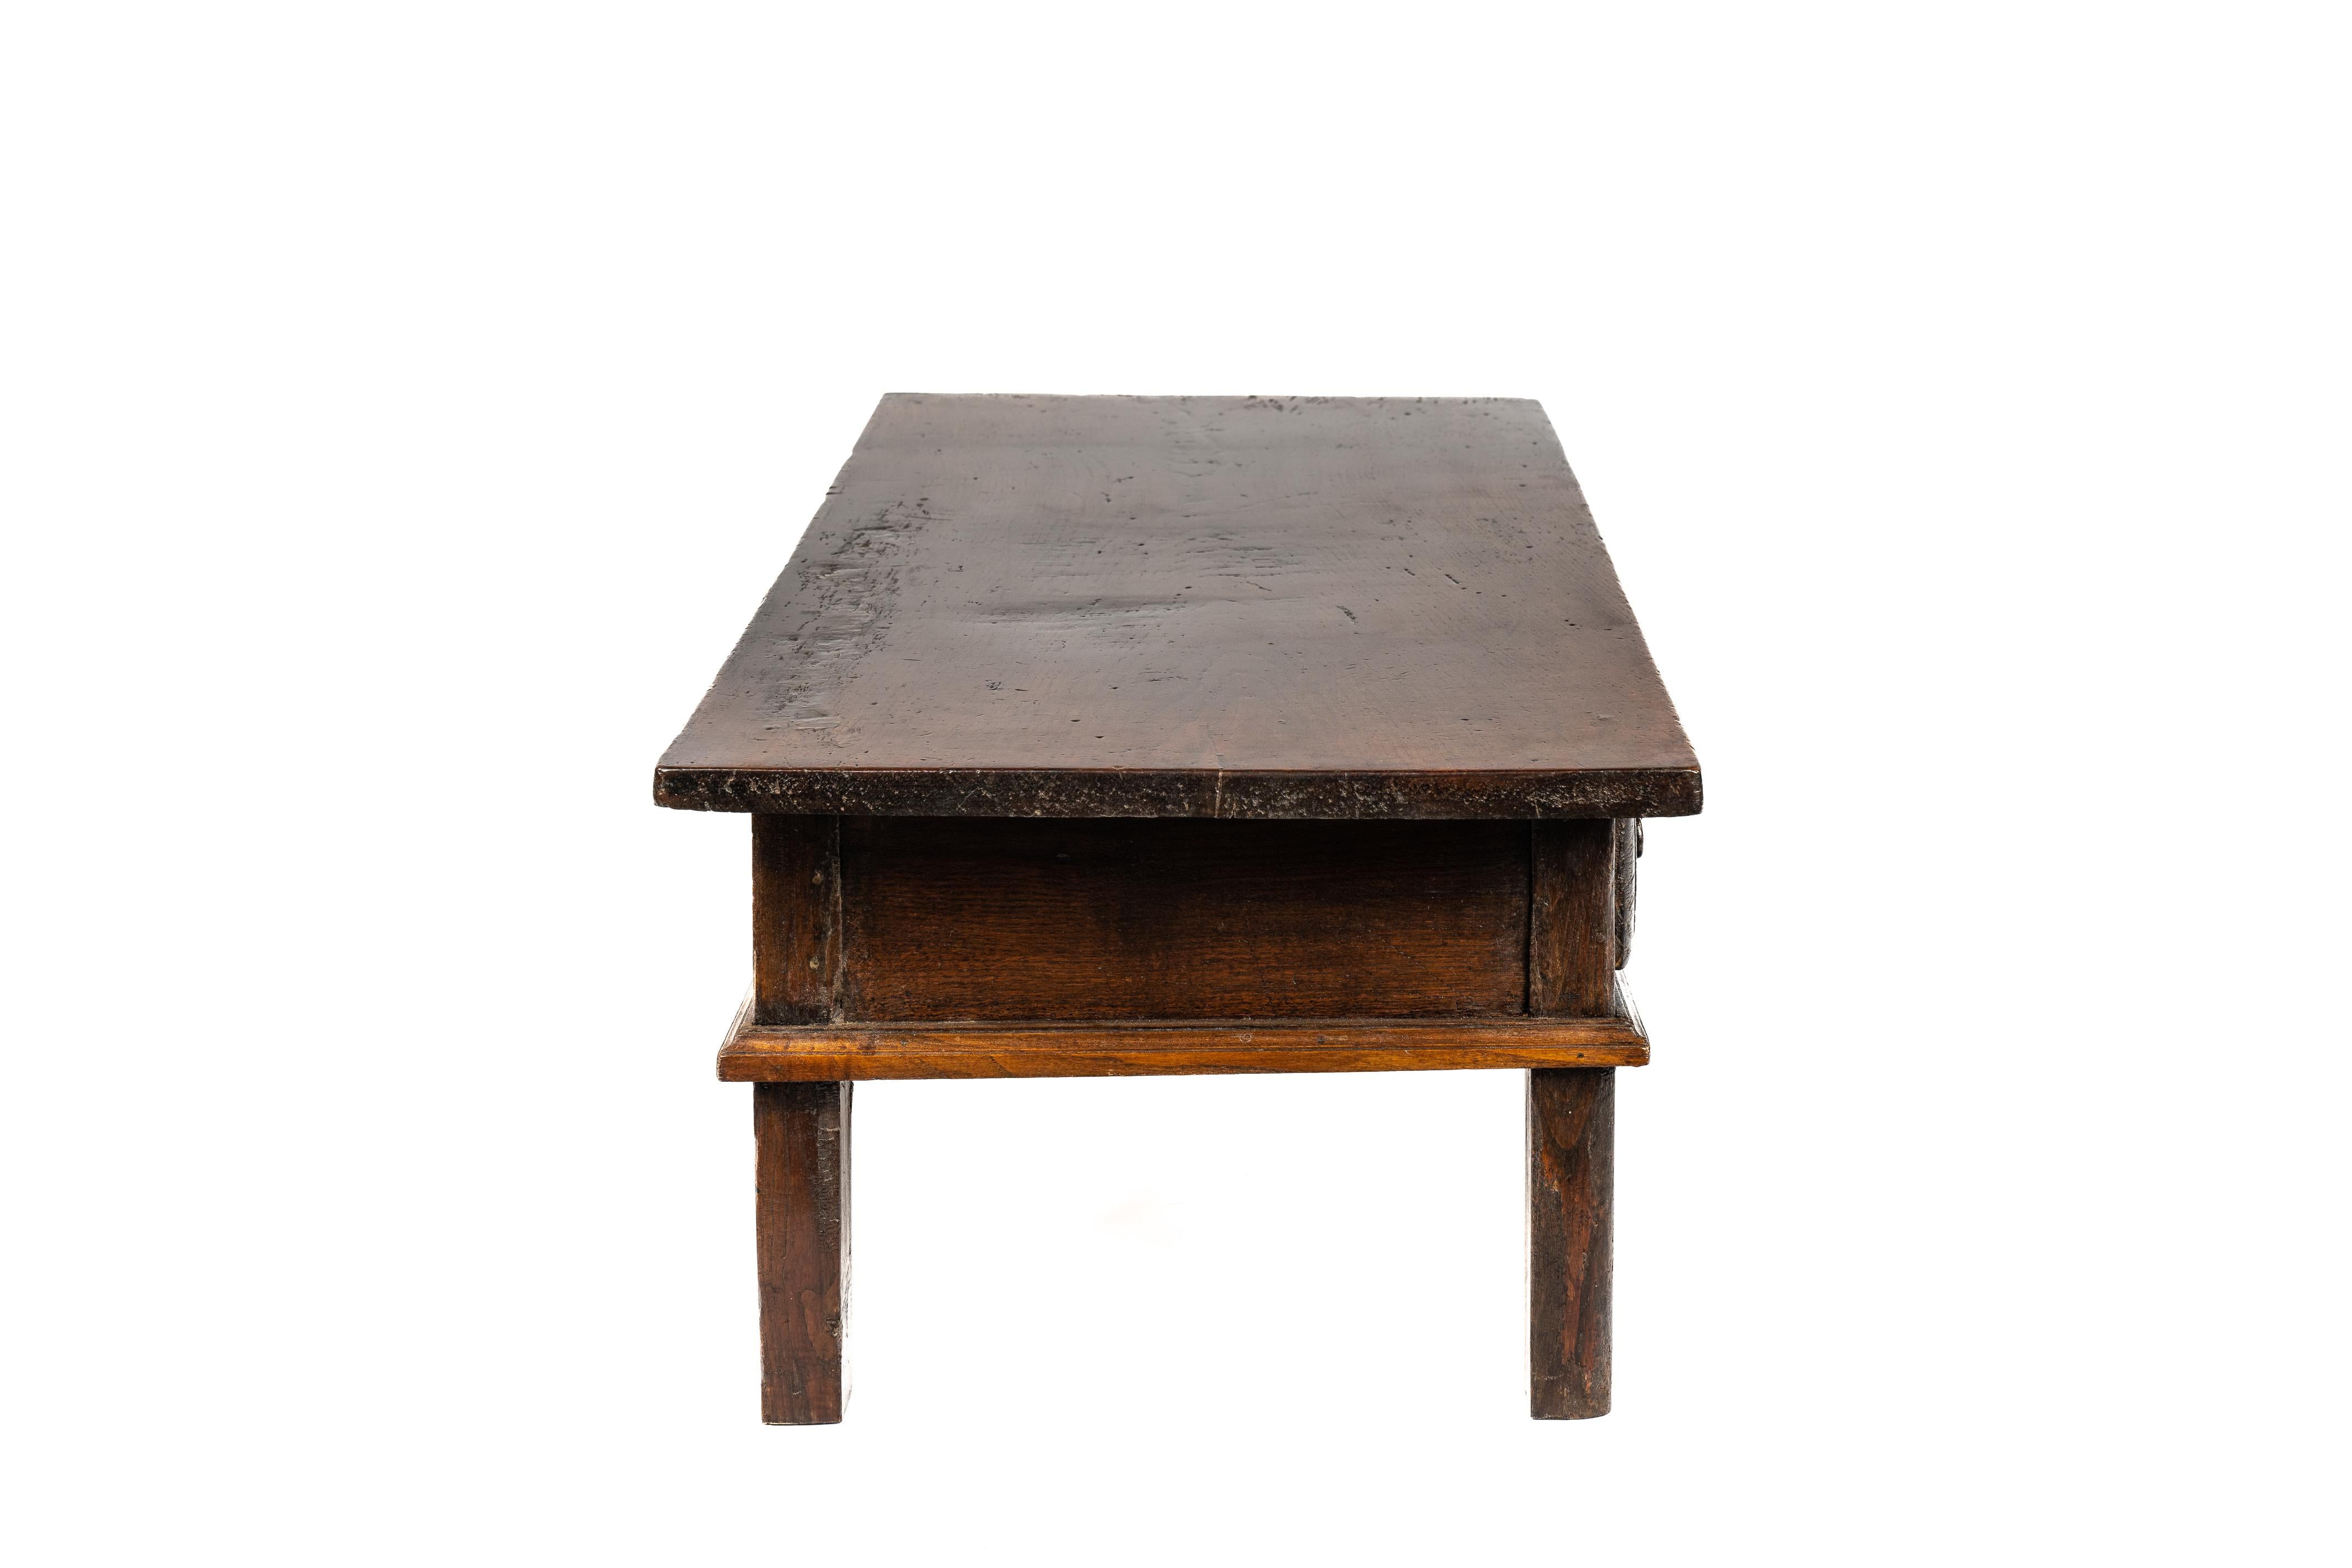 Forged Antique Early 19th Century Rustic Spanish Warm Dark Brown Chestnut Coffee Table For Sale